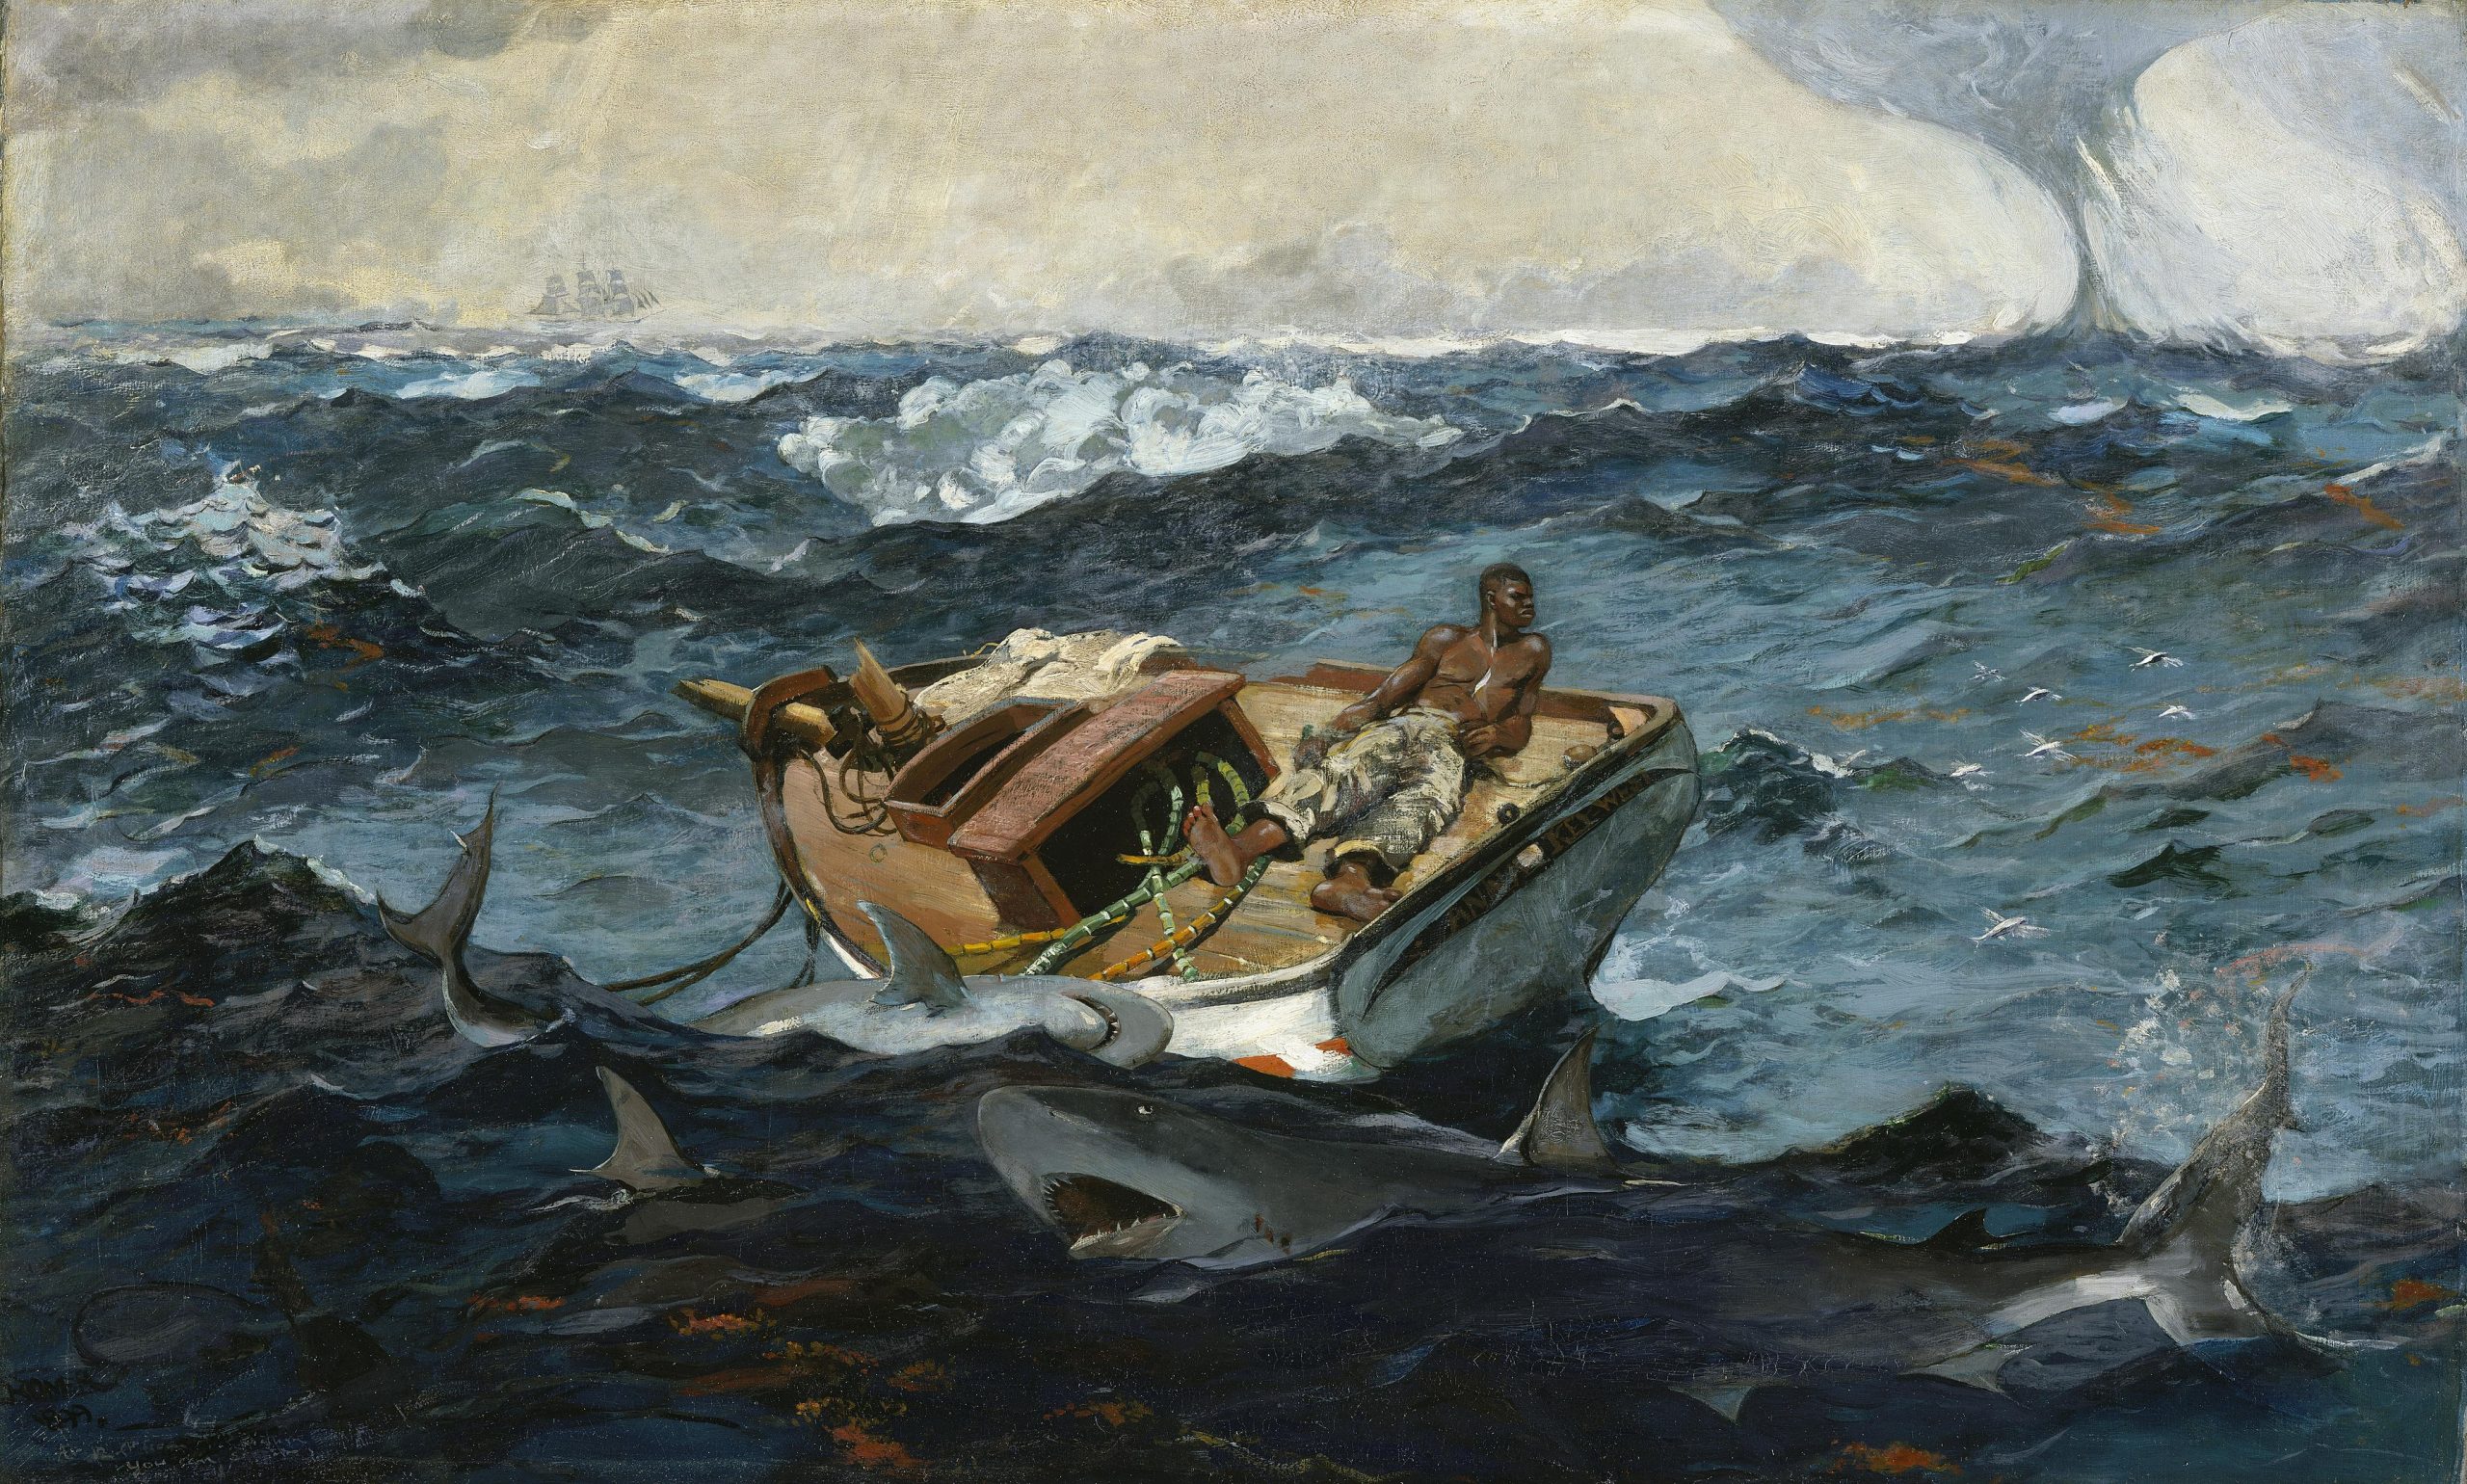 A man lying down on a small boat amidst a stormy sea with sharks struggling in the foreground